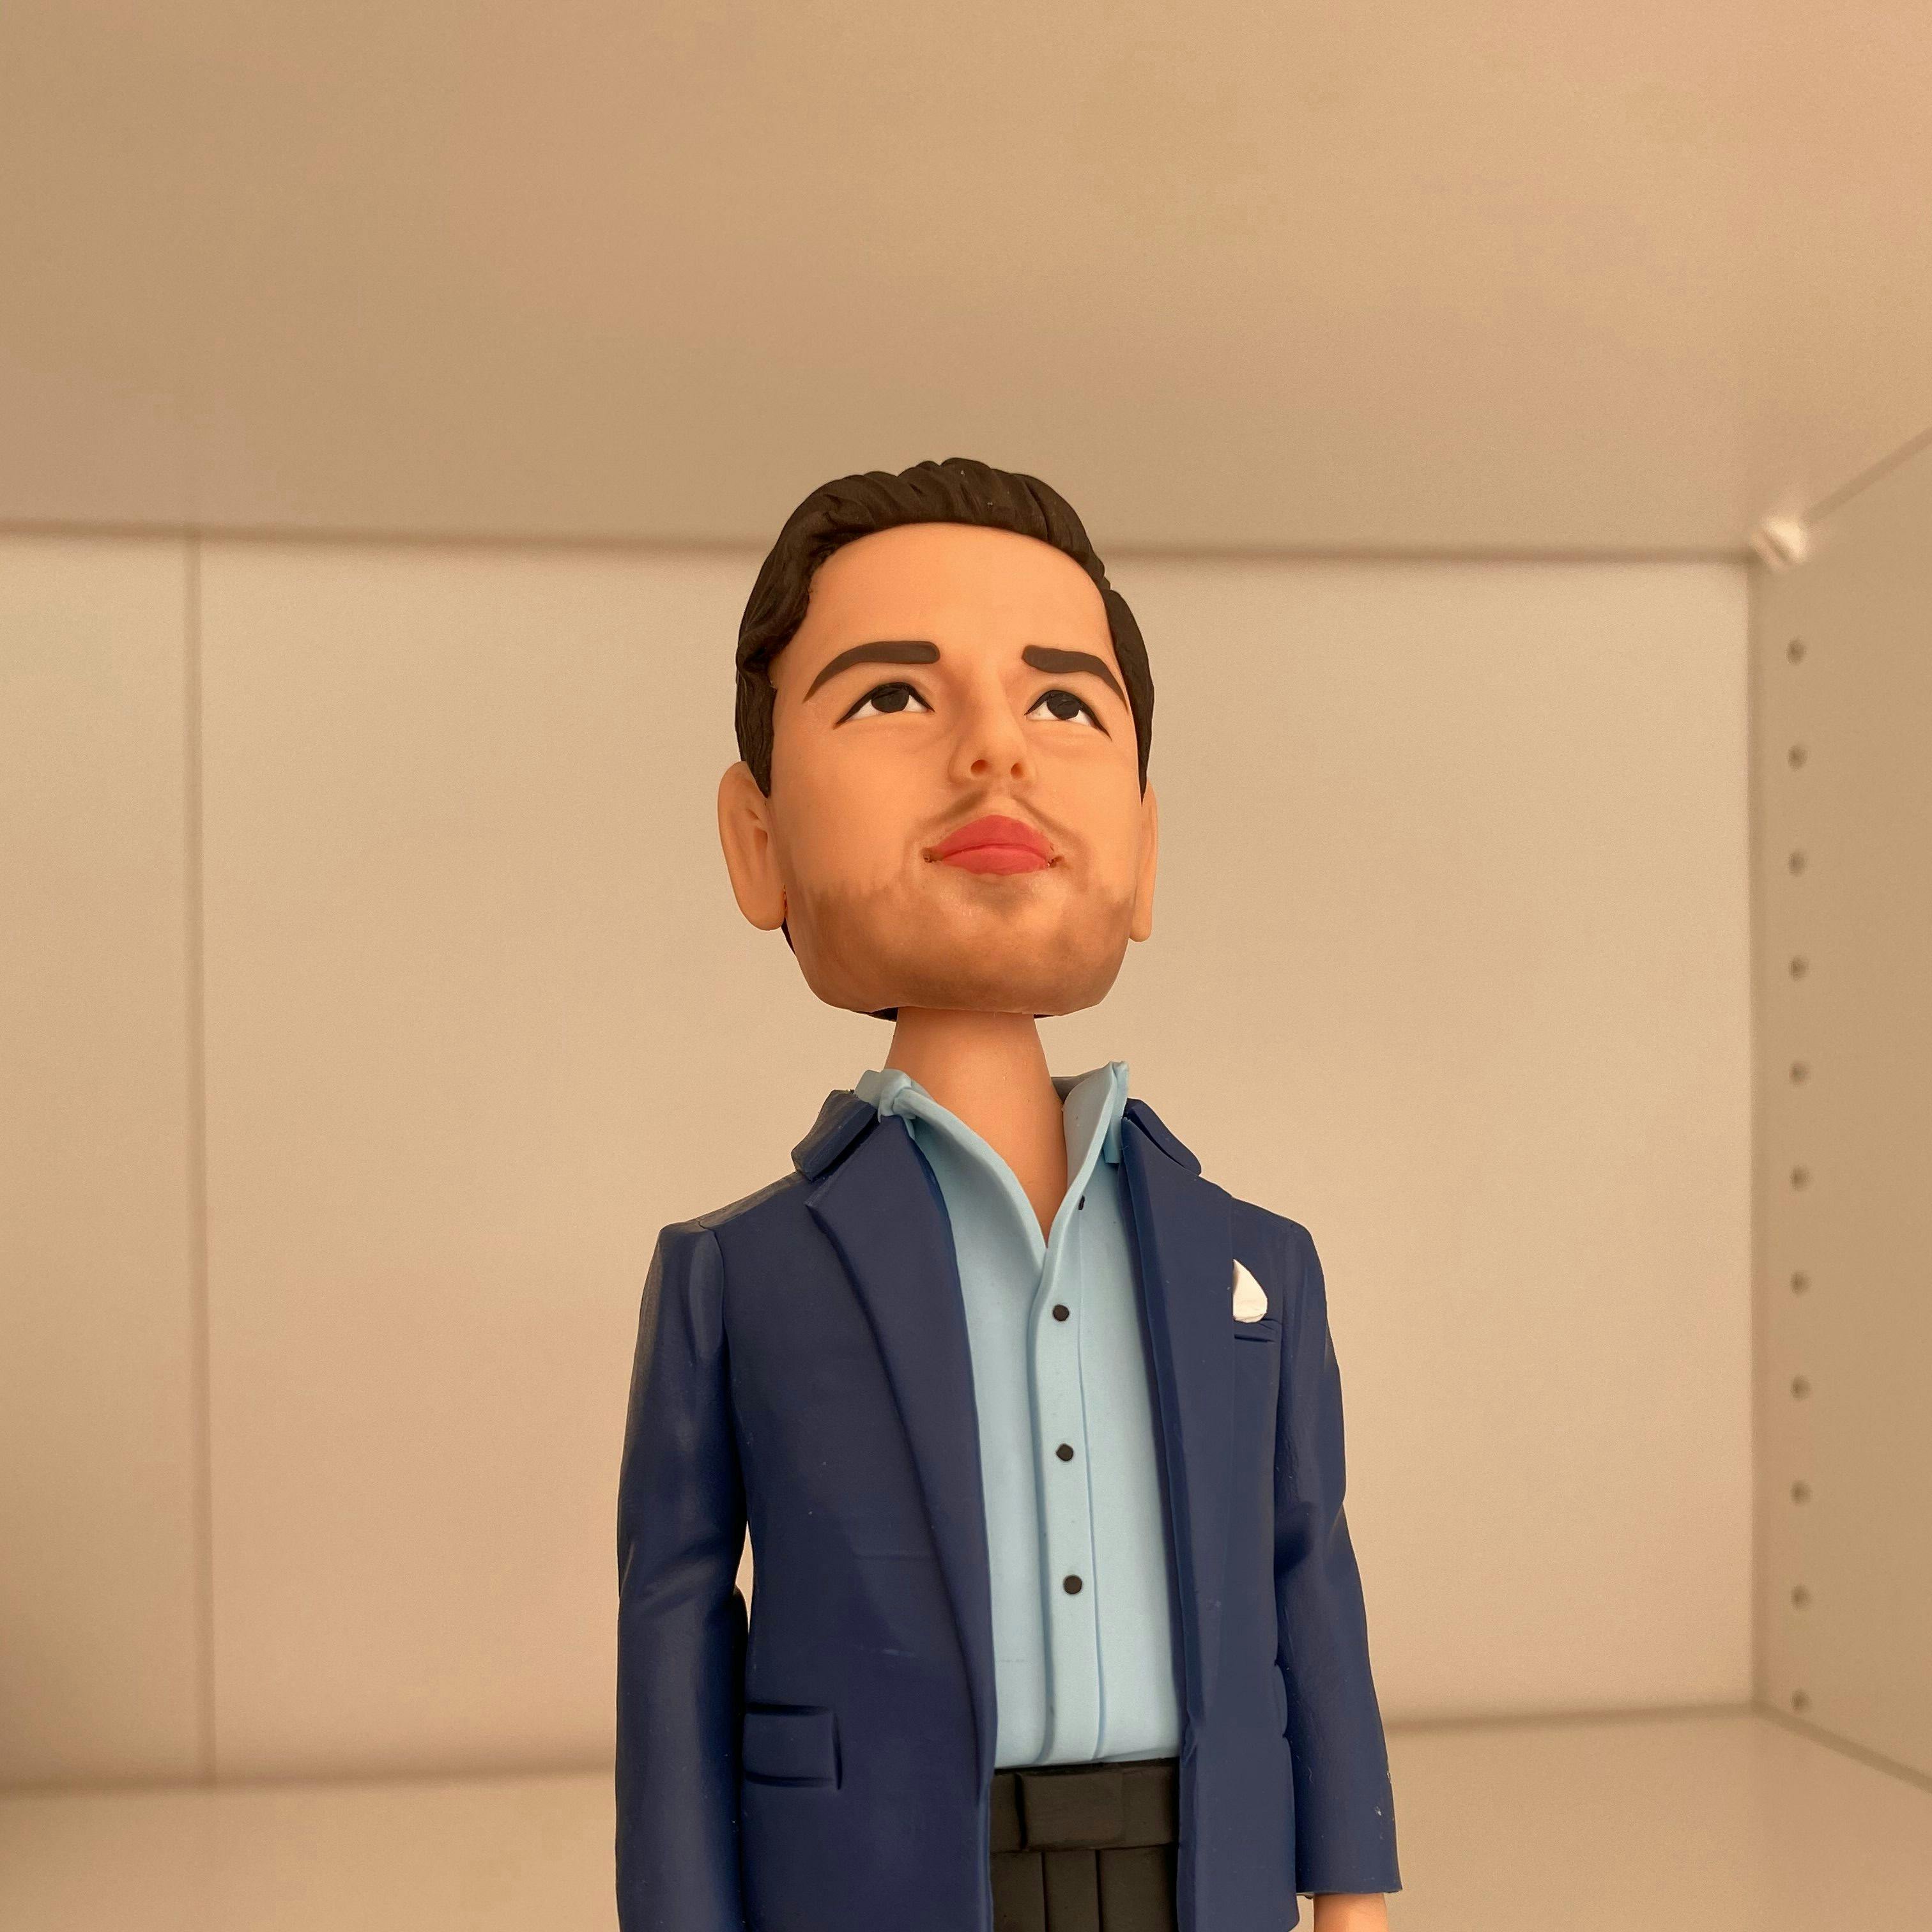 featured image - Bobble Figures & Out-of-the-Box Marketing in a Digital World